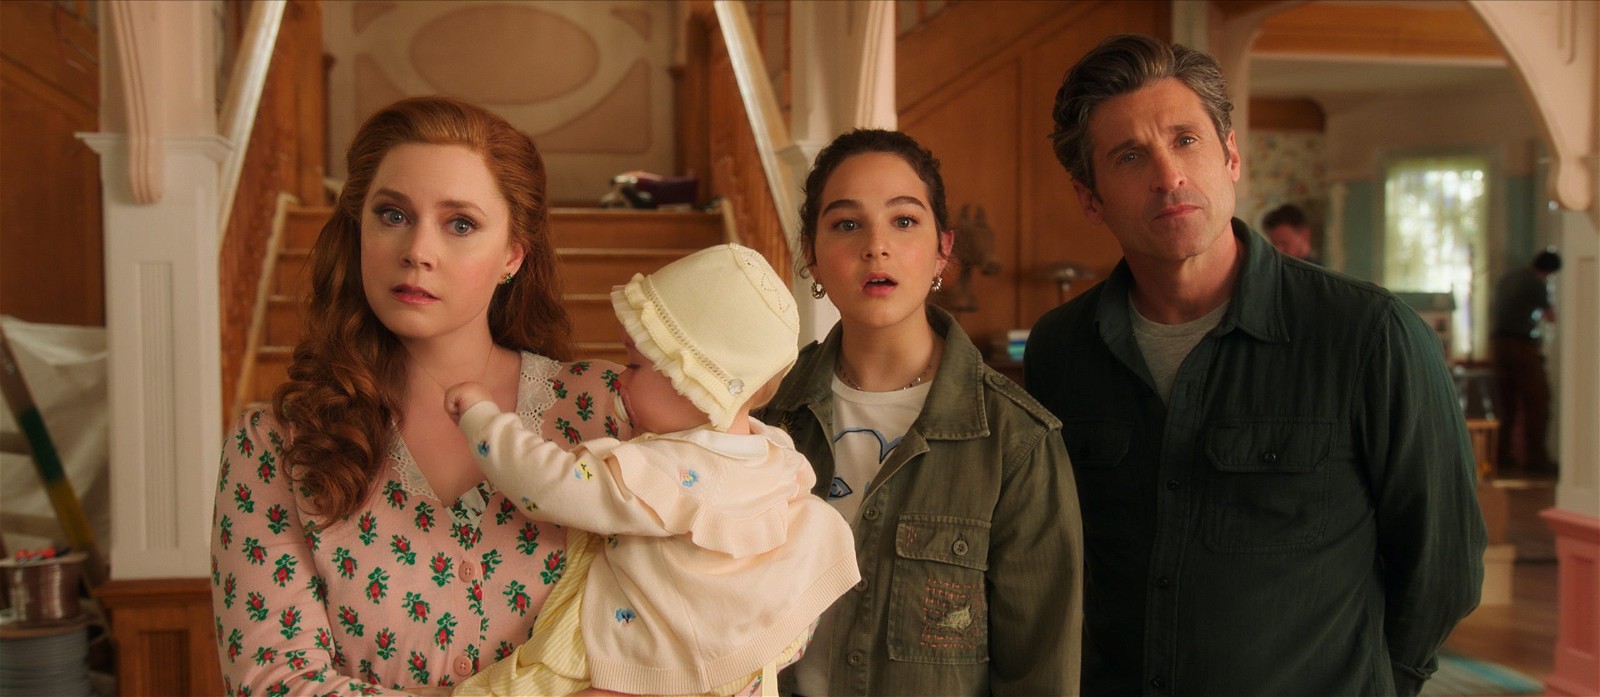 (L-R): Amy Adams as Giselle, Sofia (played by Mila & Lara Jackson), Gabriella Baldacchino as Morgan Philip, and Patrick Dempsey as Robert Philip in Disney's live-action DISENCHANTED, exclusively on Disney+. Courtesy of Disney Enterprises; Inc. © 2022 Disney Enterprises, Inc. All Rights Reserved.